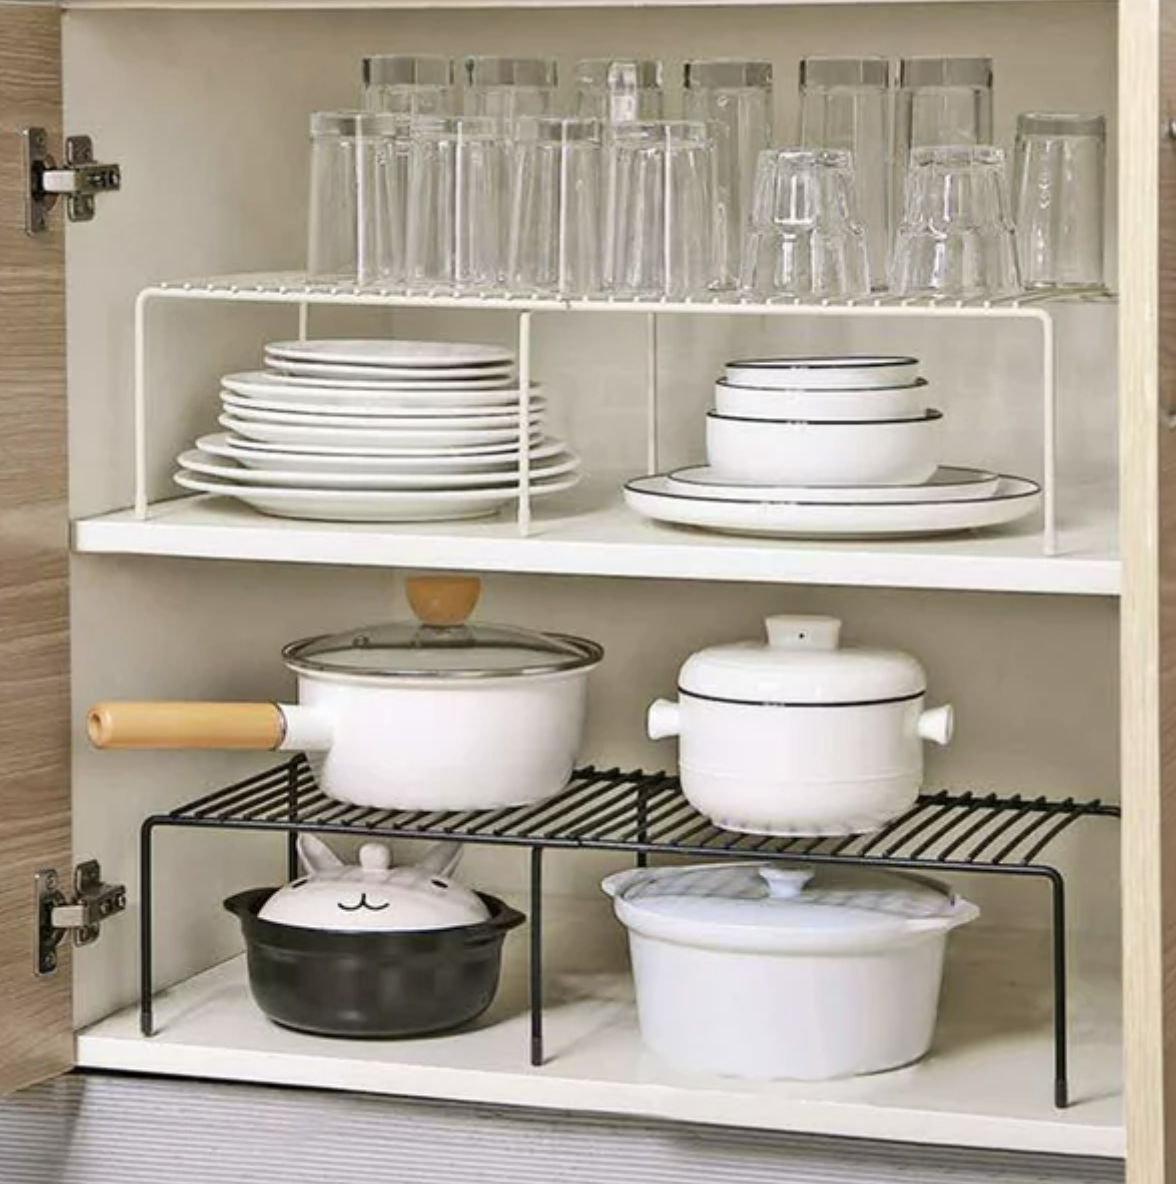 12 Genius Kitchen Cabinet Organization Ideas You’ll Want to Copy - Mozie